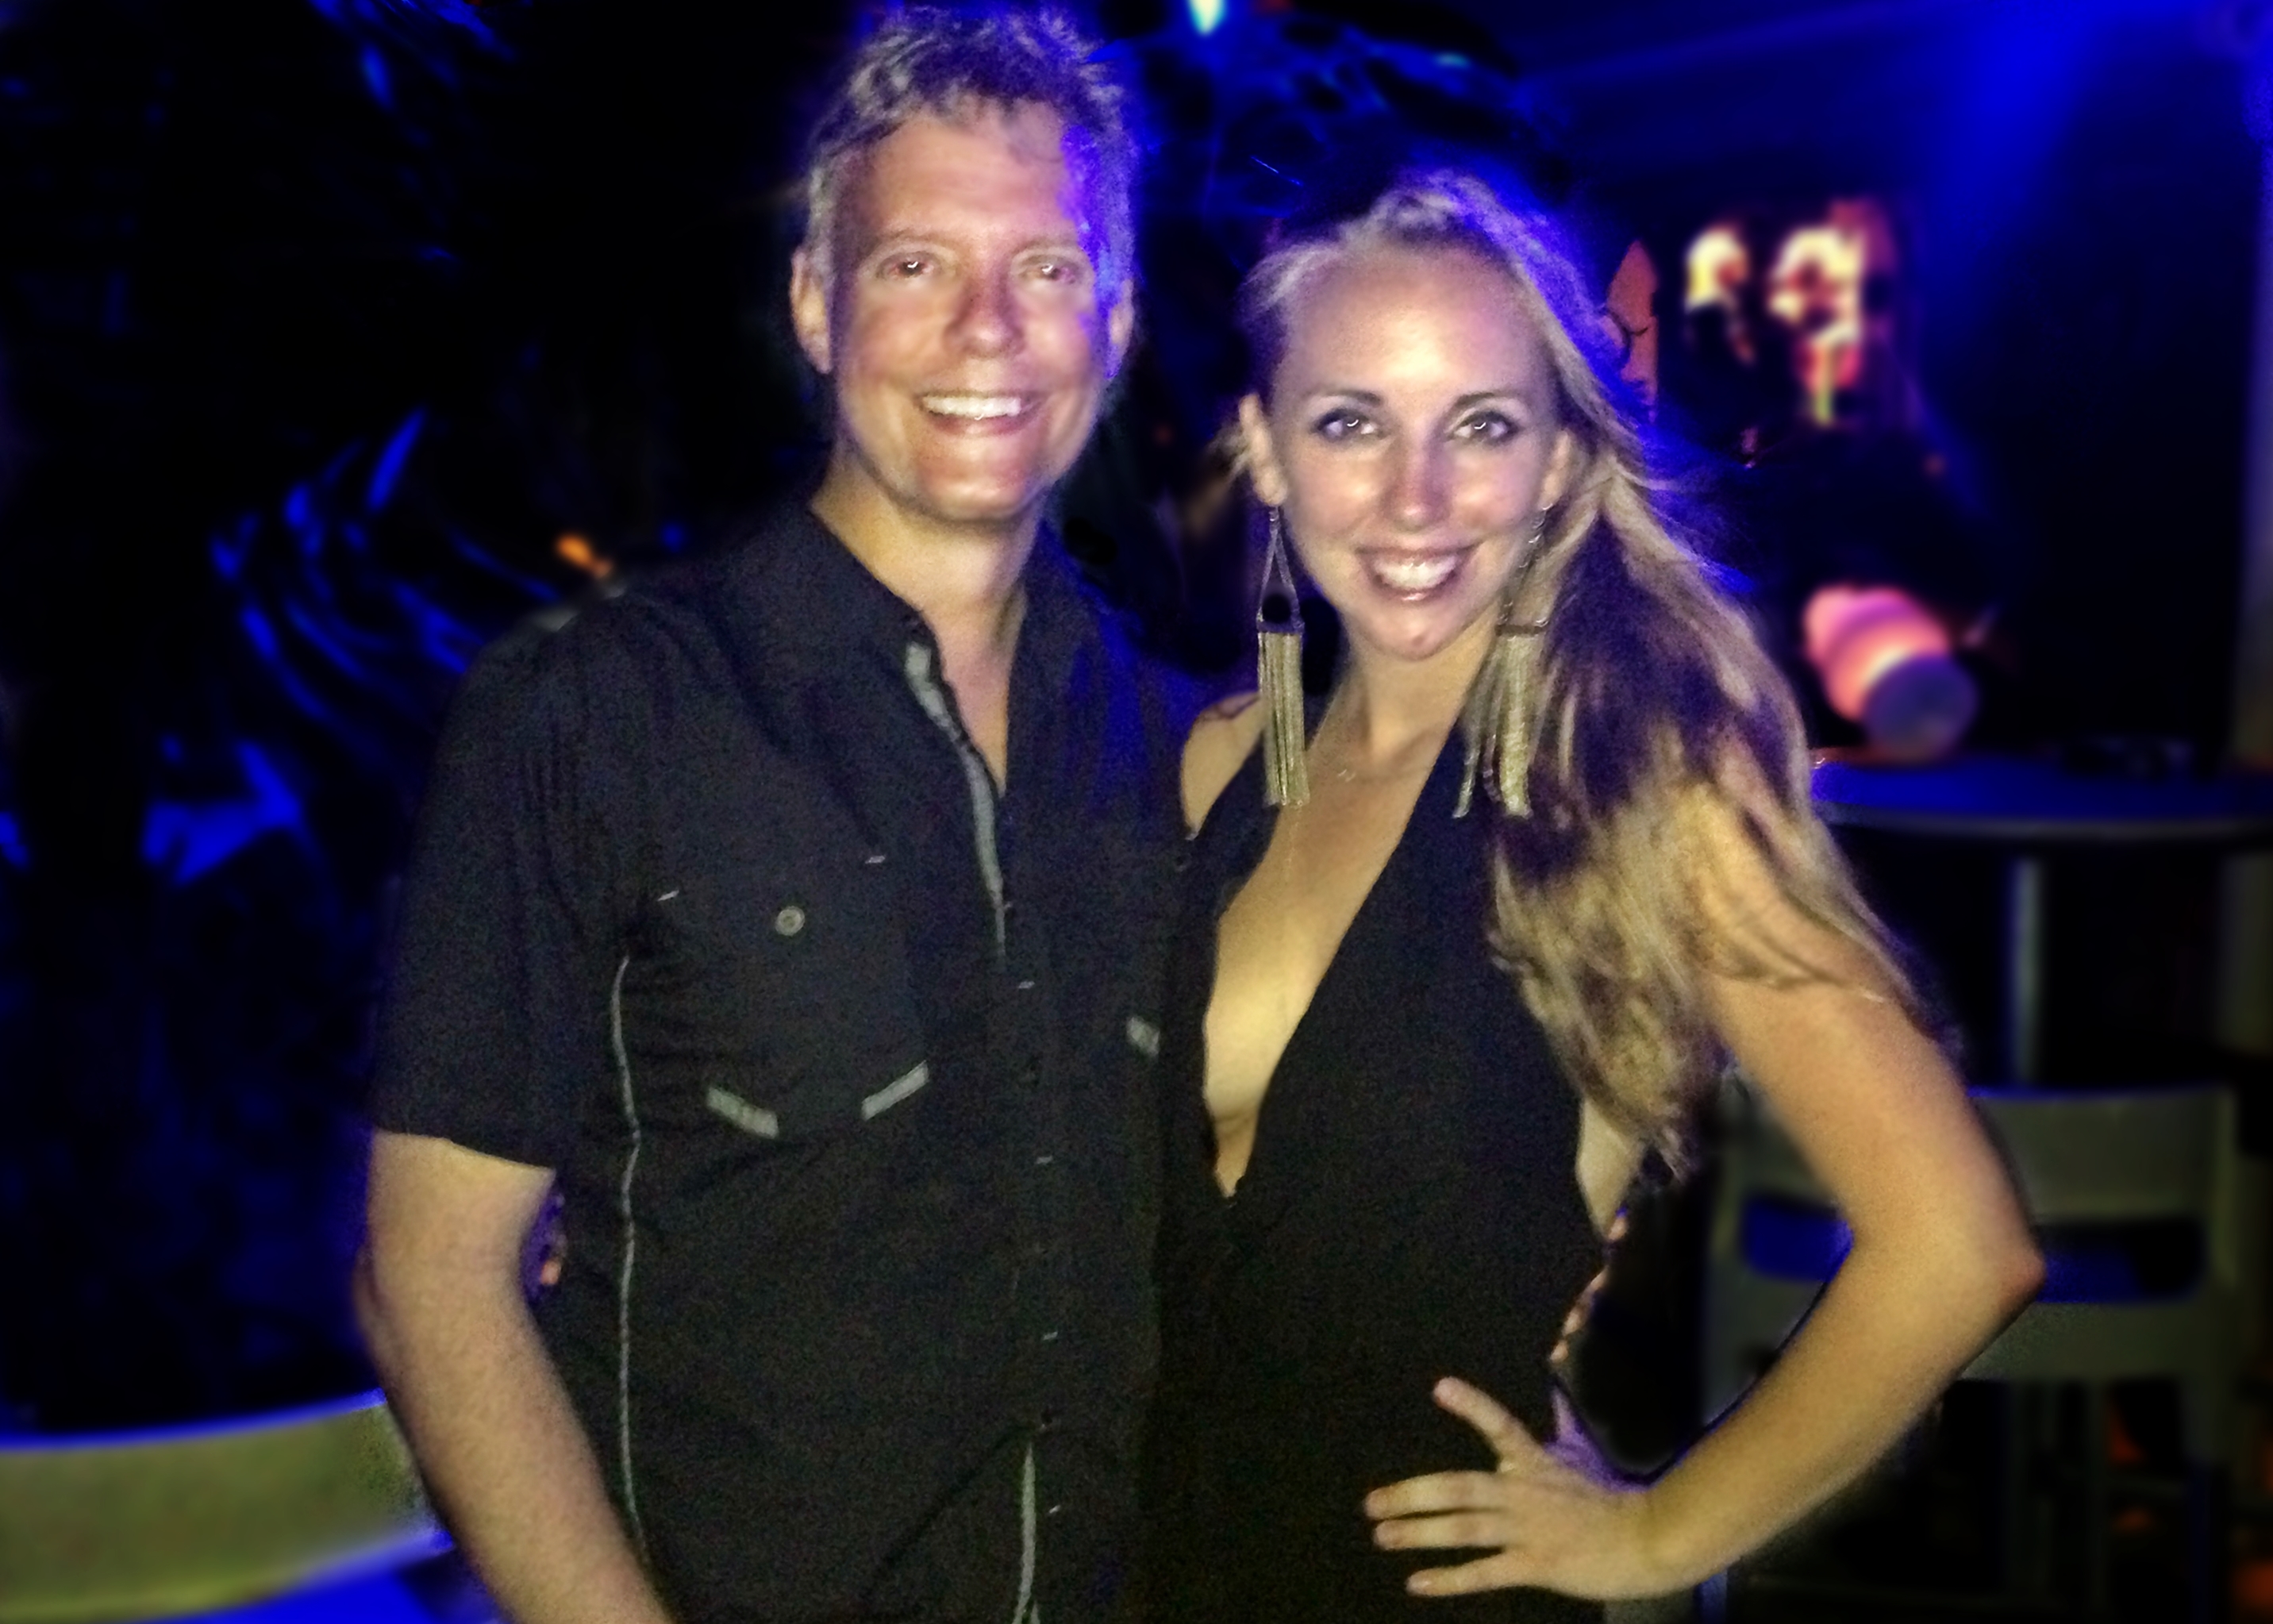 David Salyers at La Plage, St. Barts with Liz Fohl (August 2013) http://www.lizfohl.com/